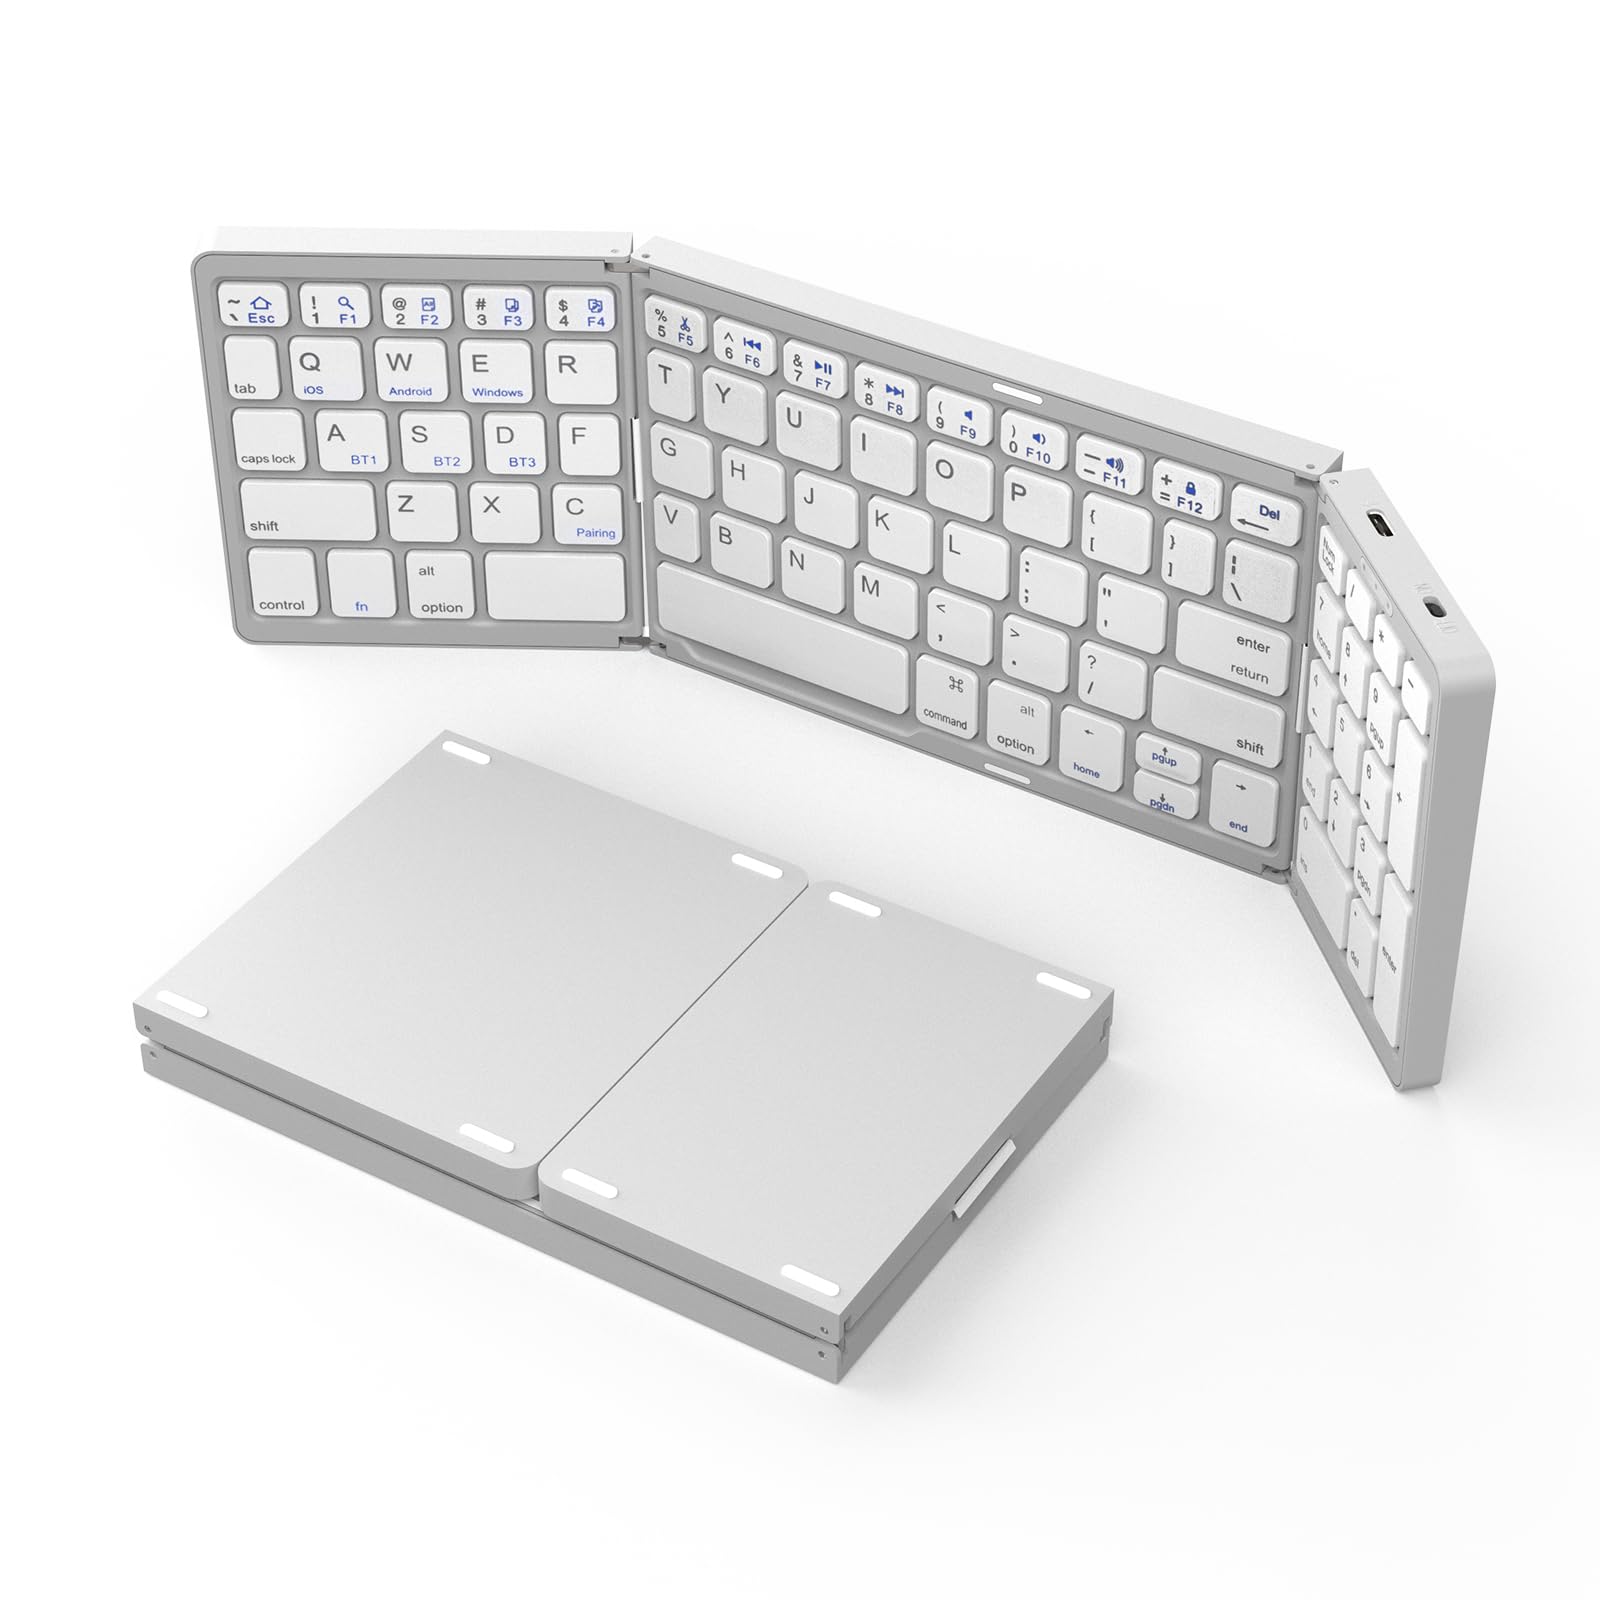 Foldable Bluetooth Keyboard with Numeric Keypad - USB-C Rechargeable, Portable for Laptop, Tablet, iPad, Smartphone (Silver)